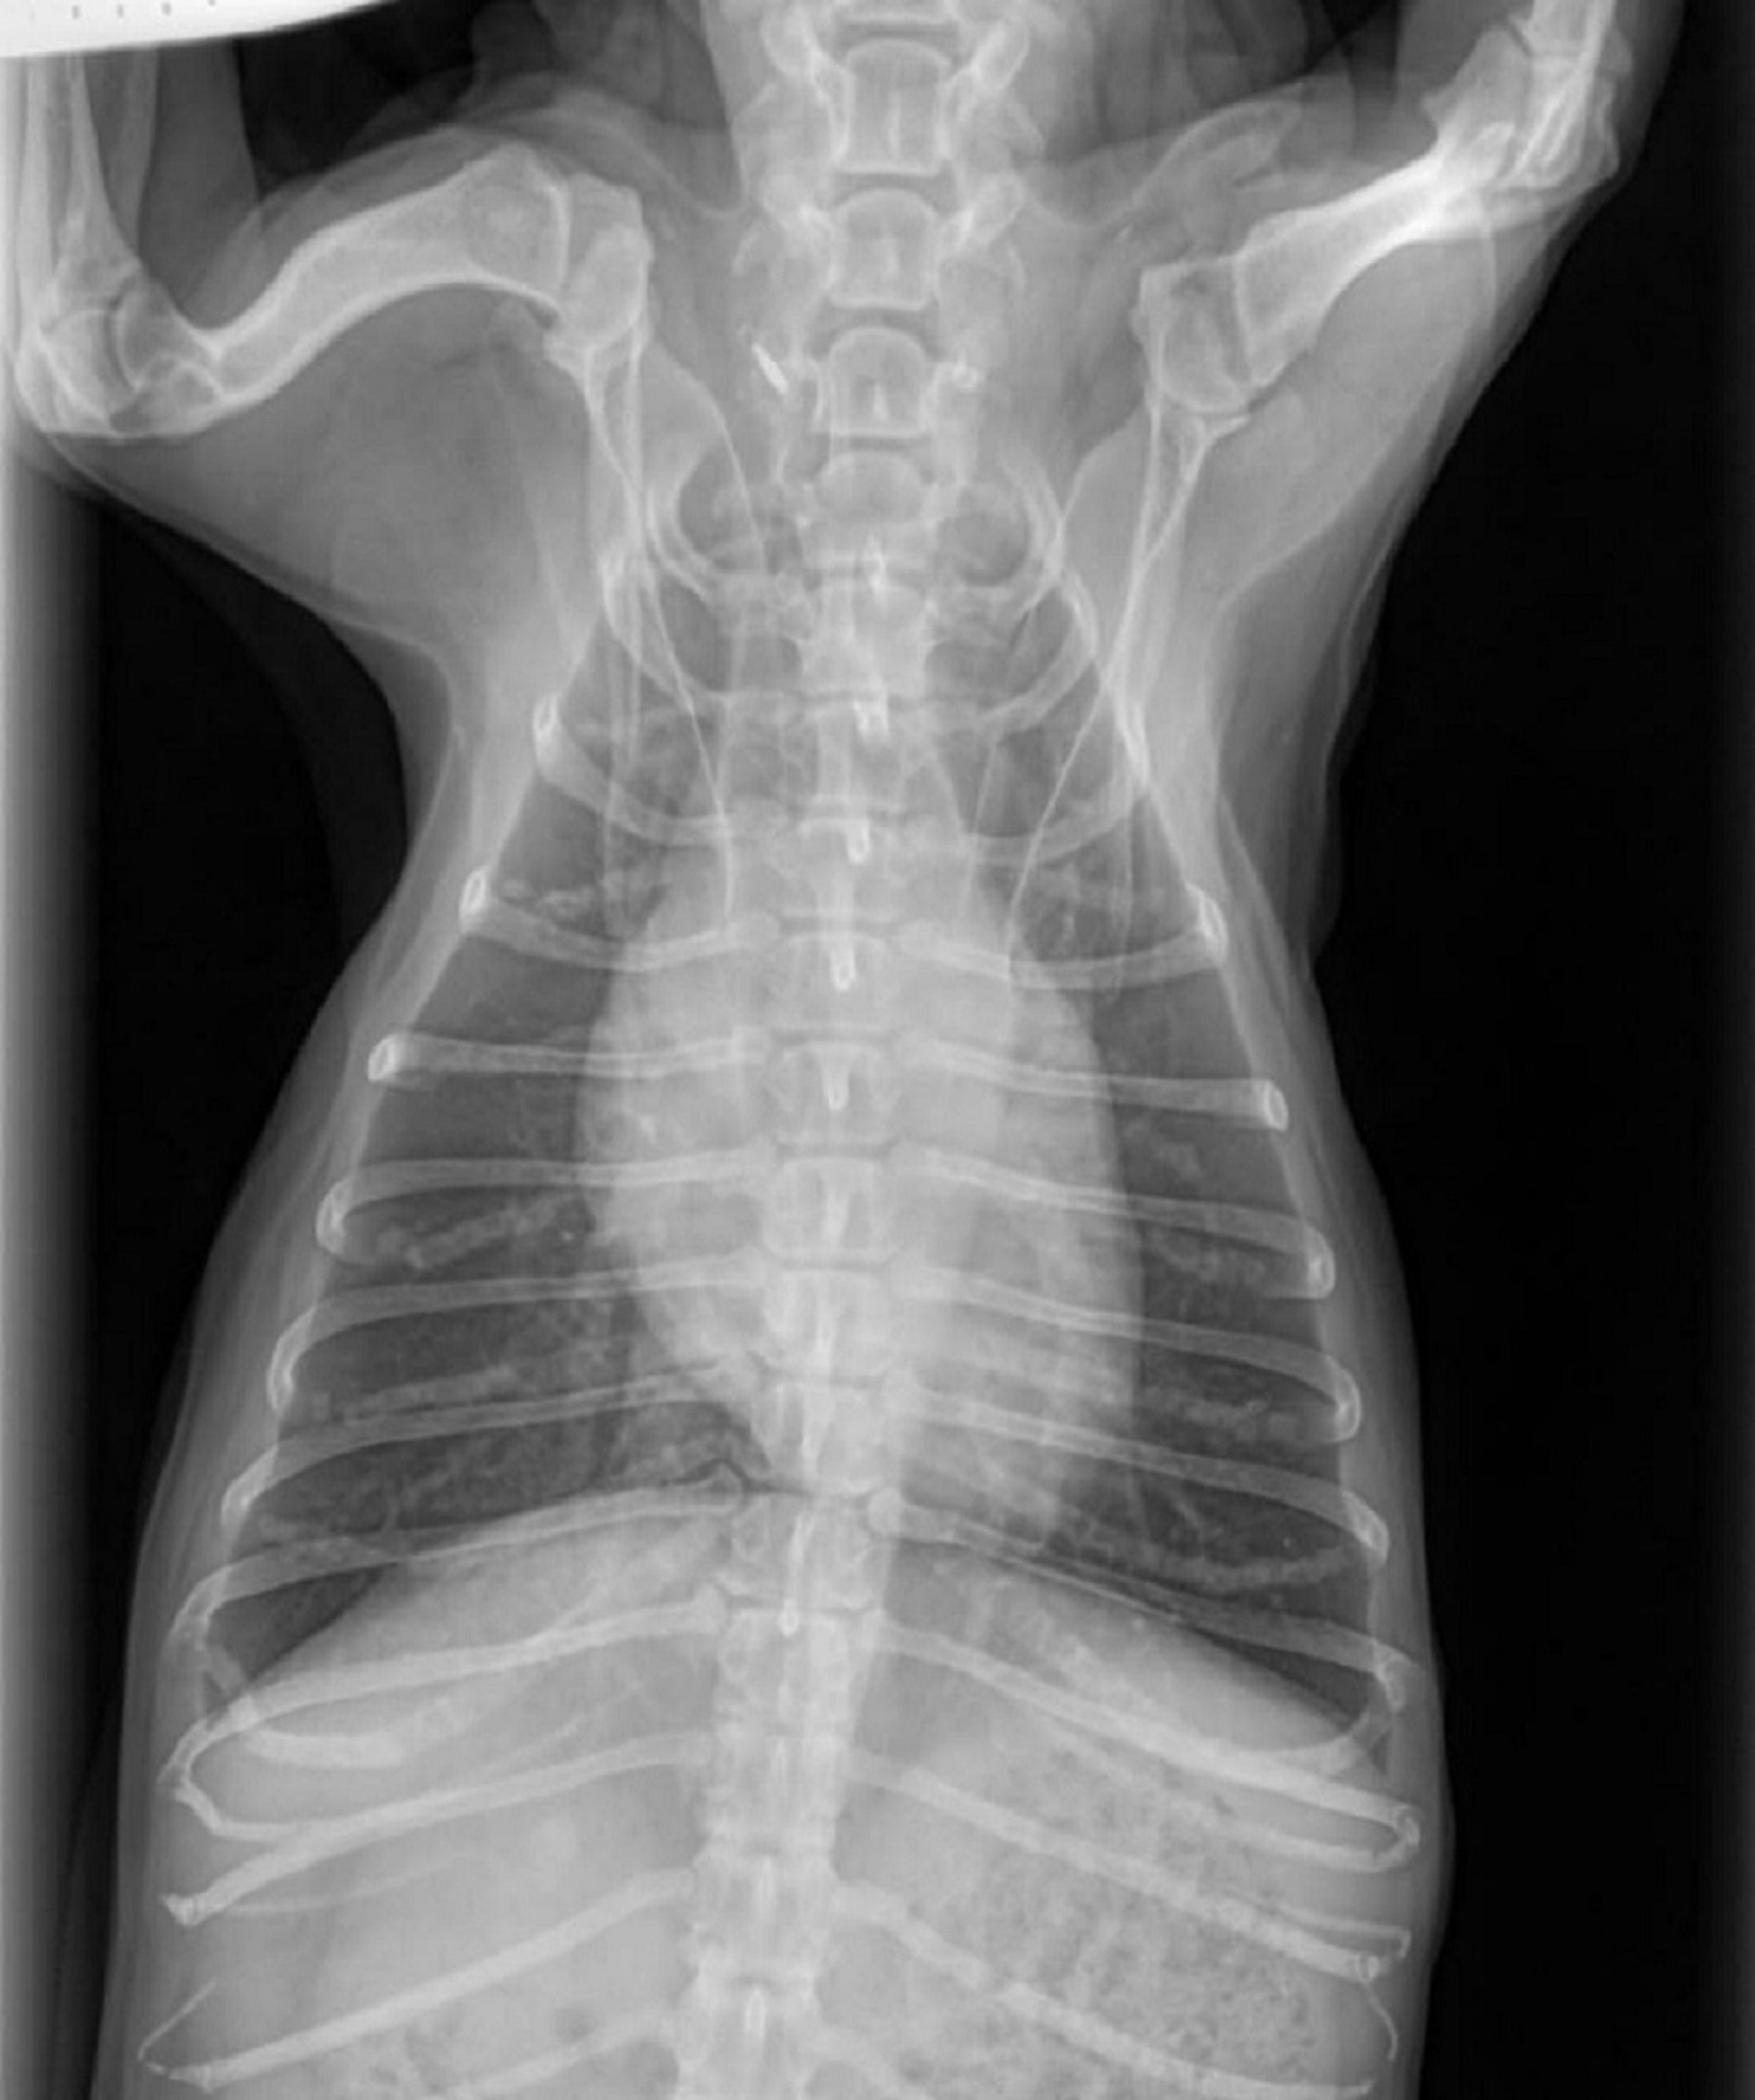 Ventrodorsal radiograph, normal dog with shallow chest